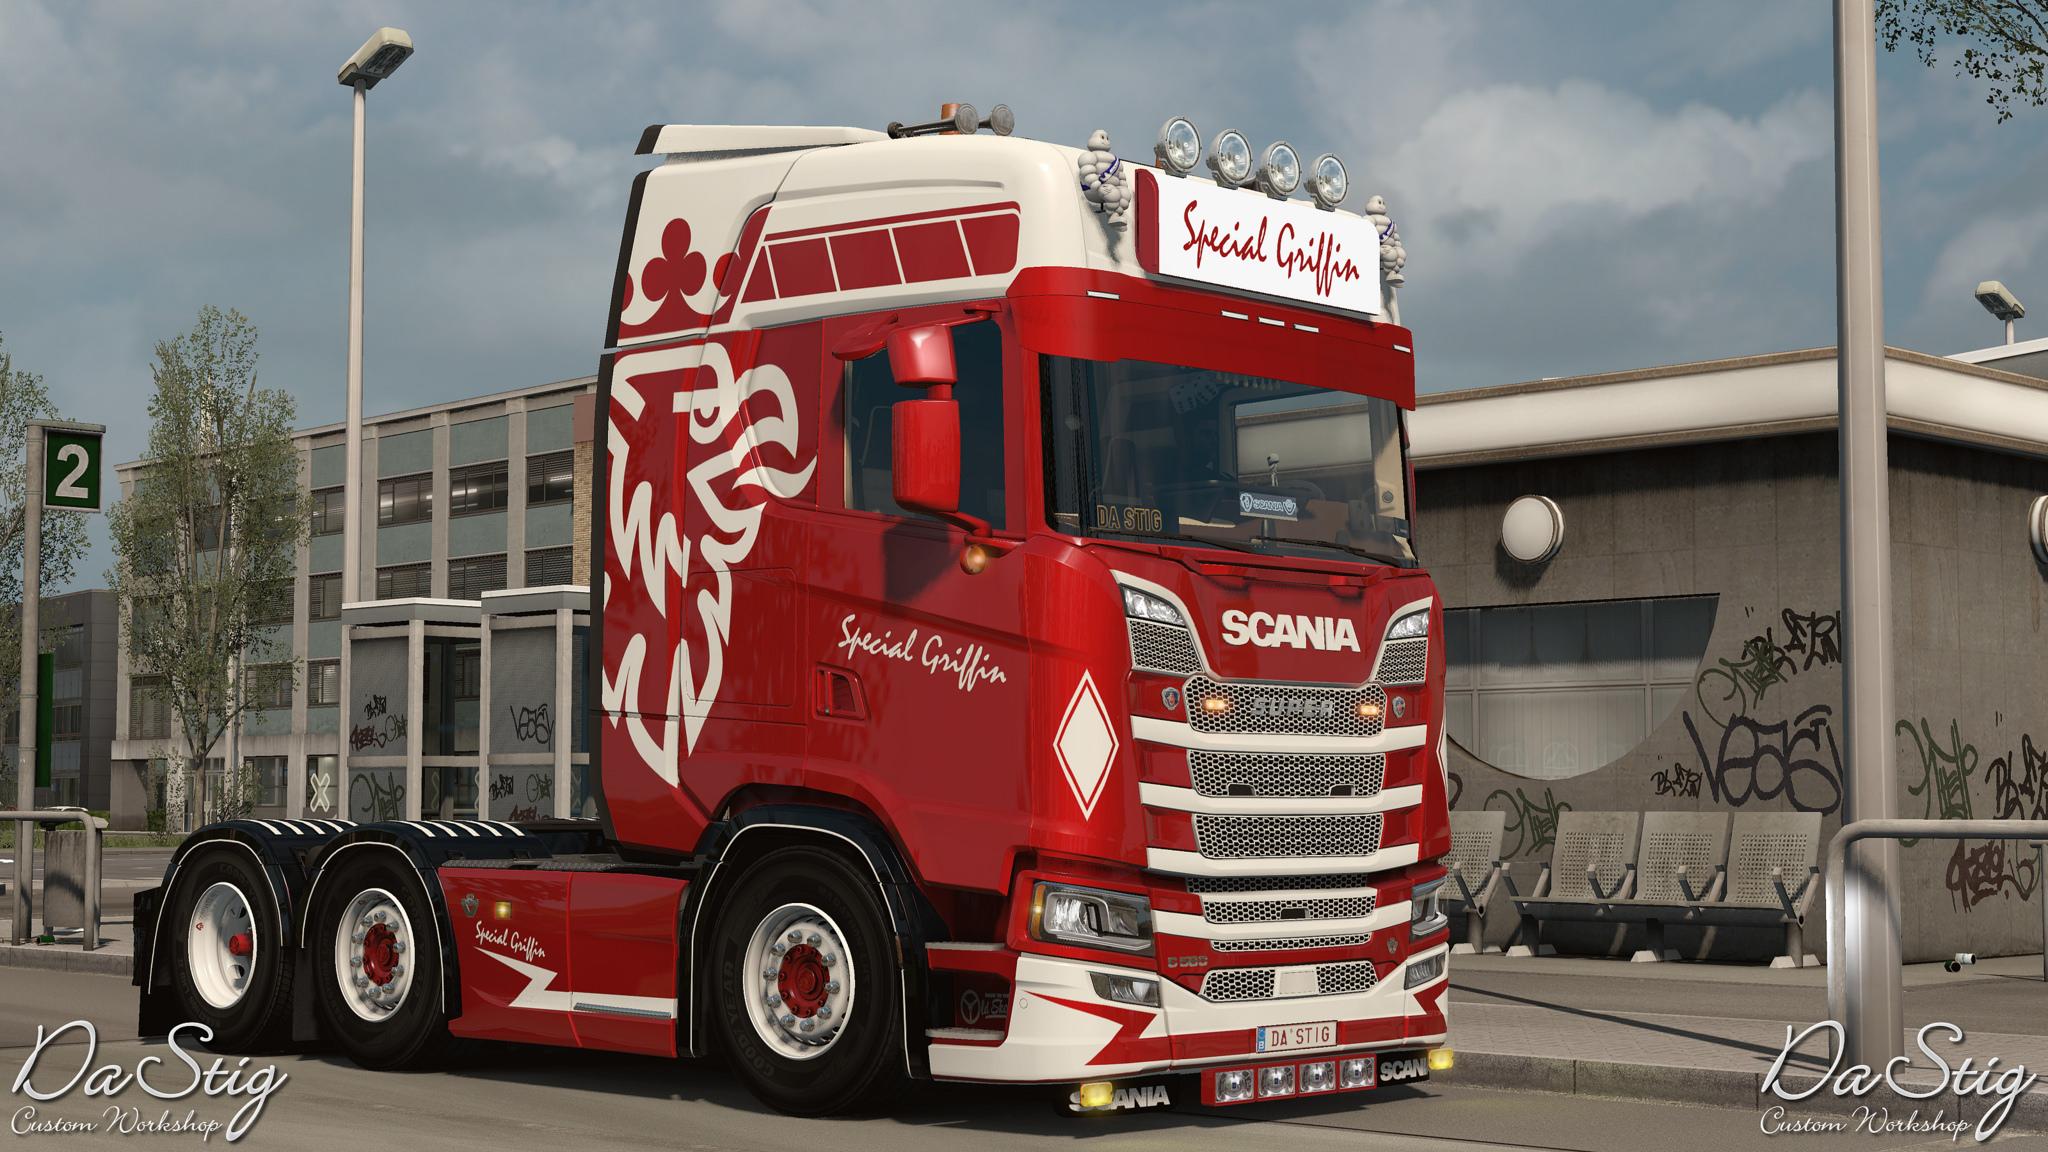 Special Griffin skin for Scania Next Gen 1.33